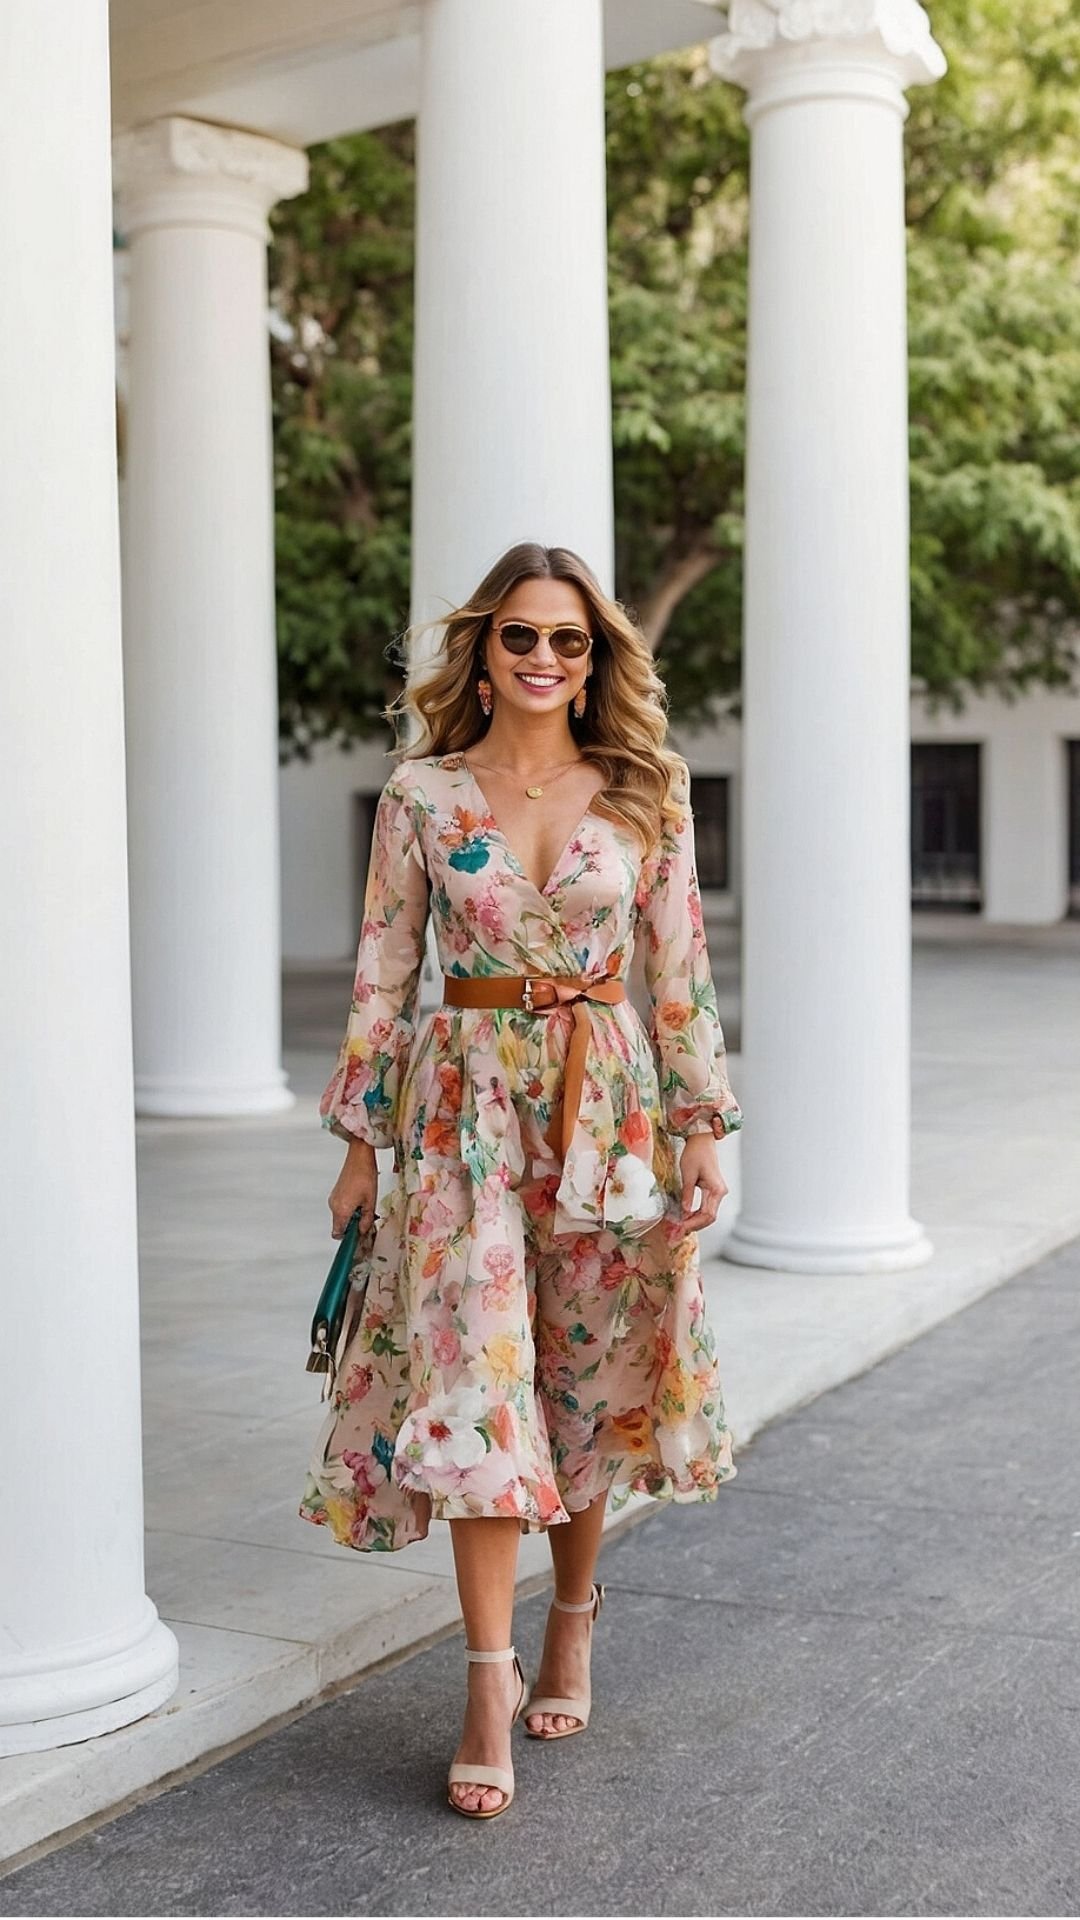 Pillars of Style: Floral Wrap Dress & Classic Heels